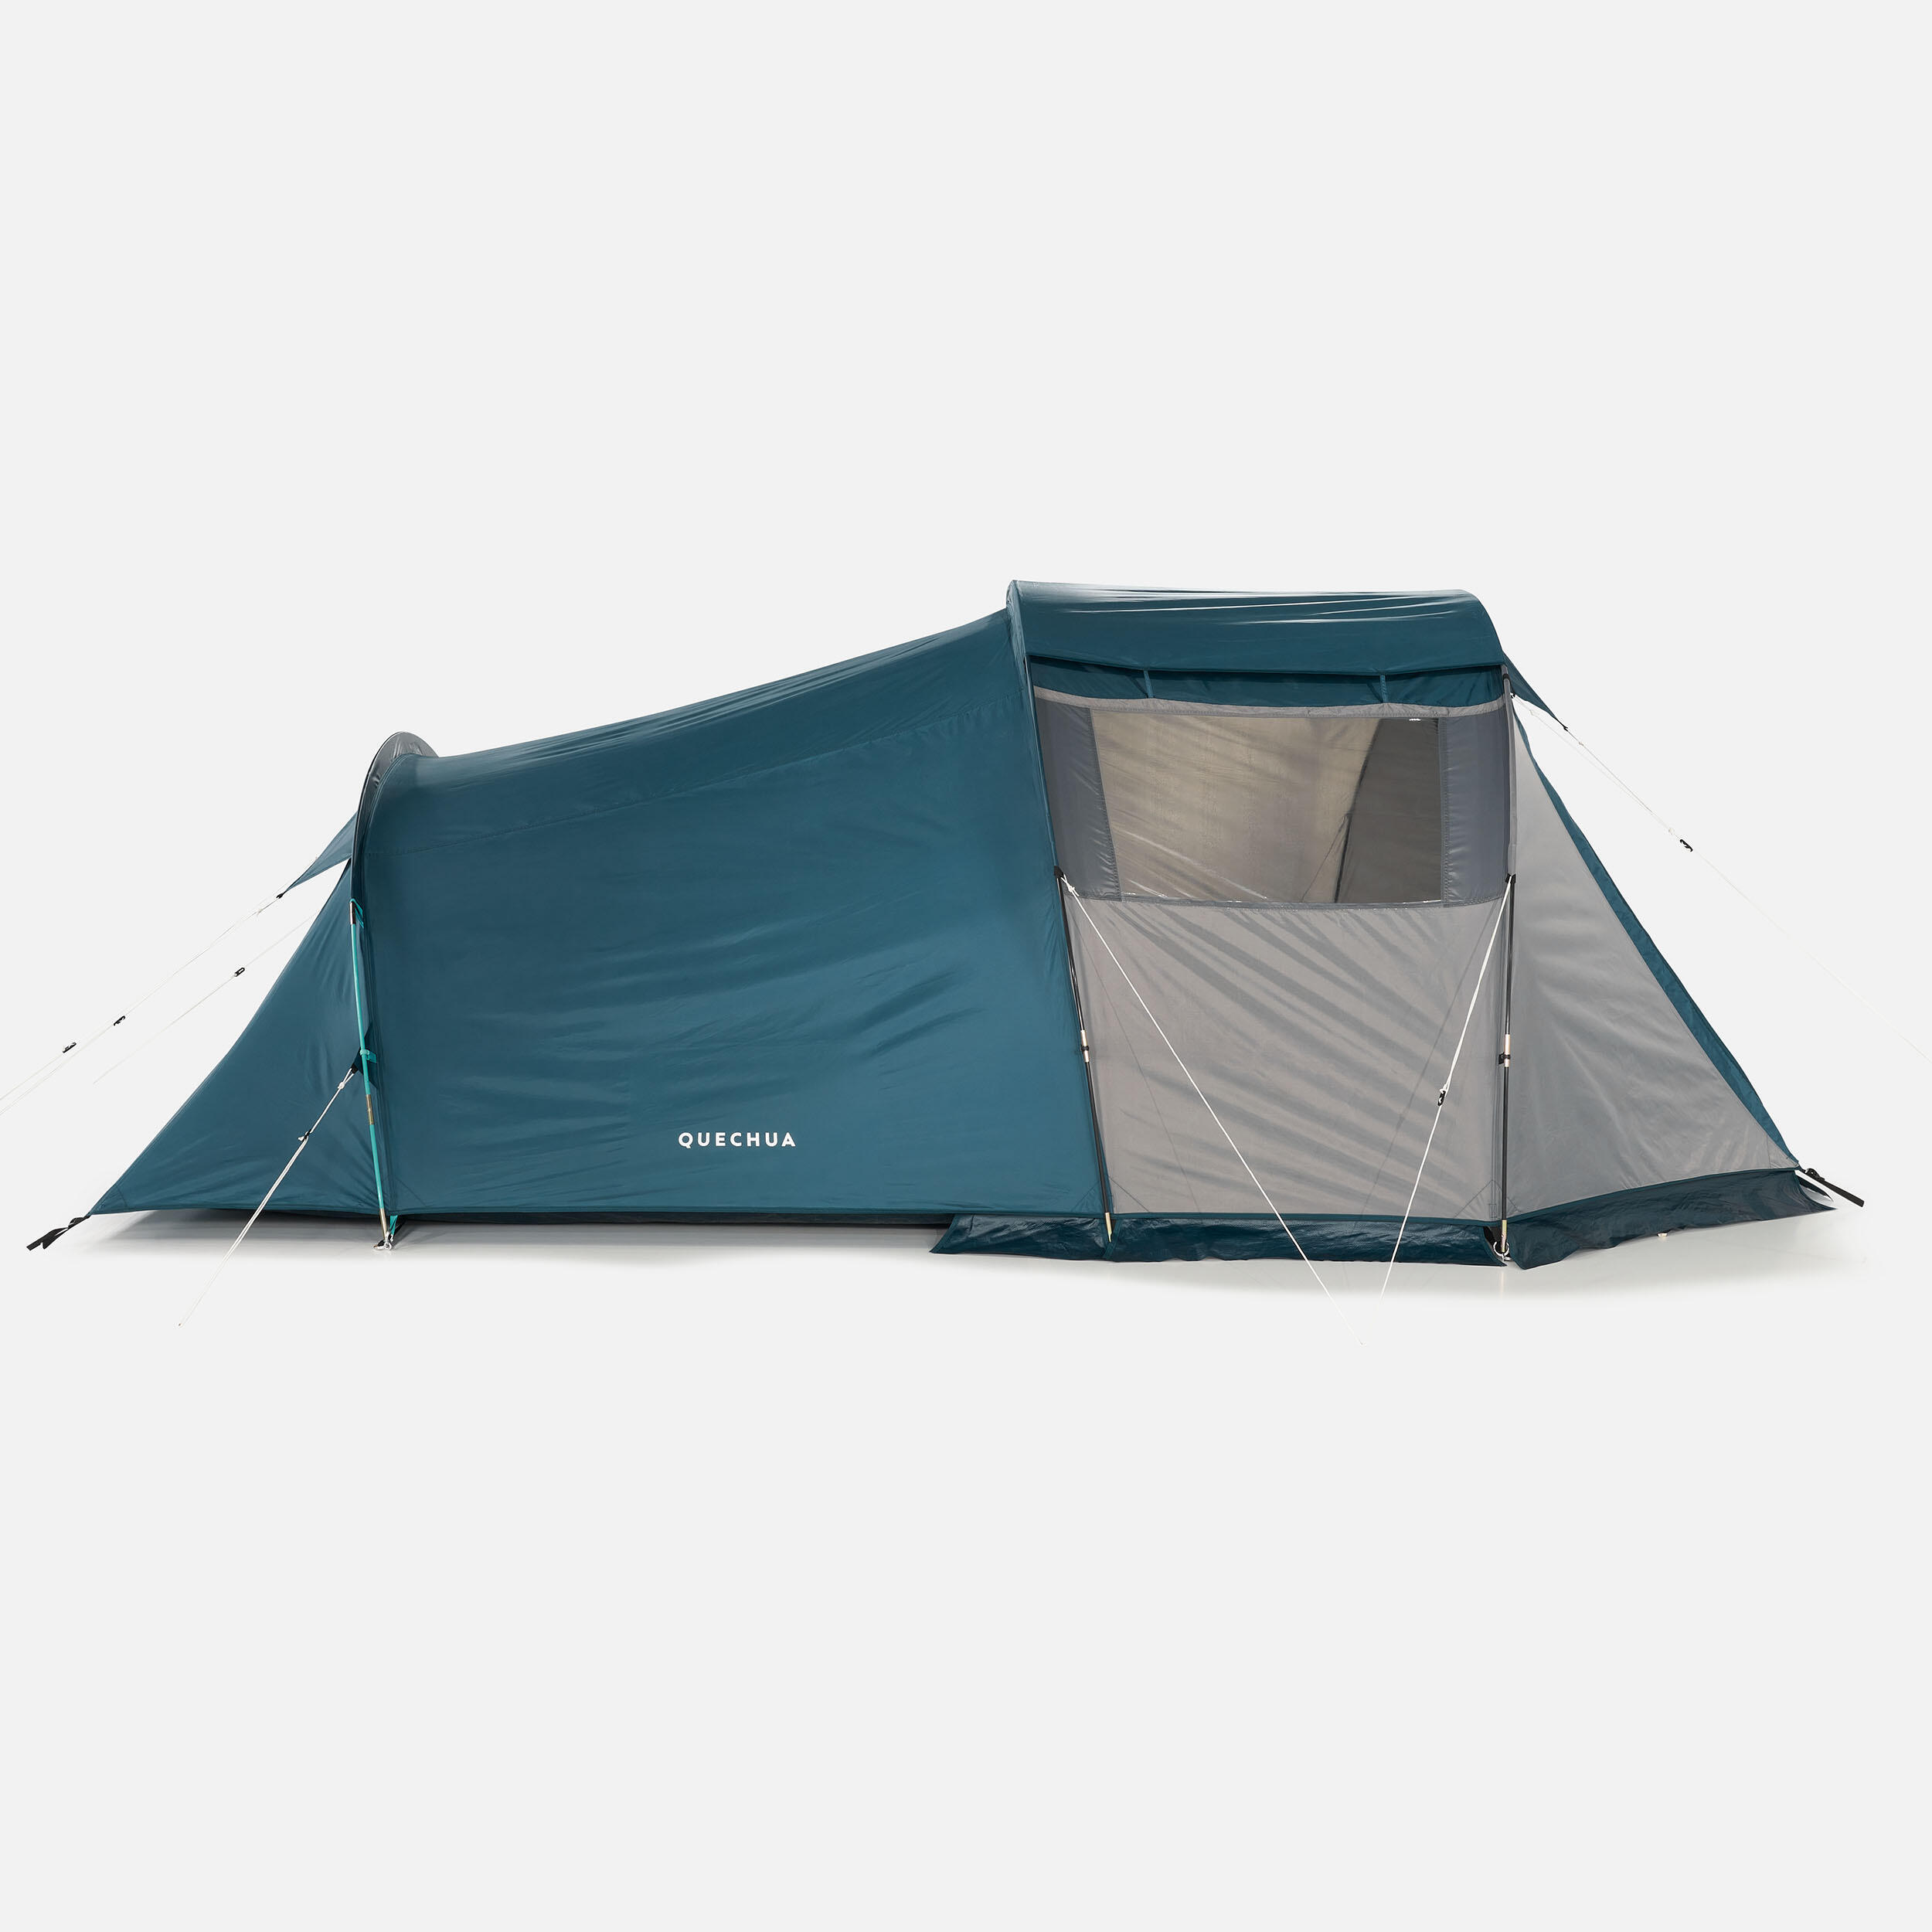 Camping tent - MH100 XXL - 4 person 8/15